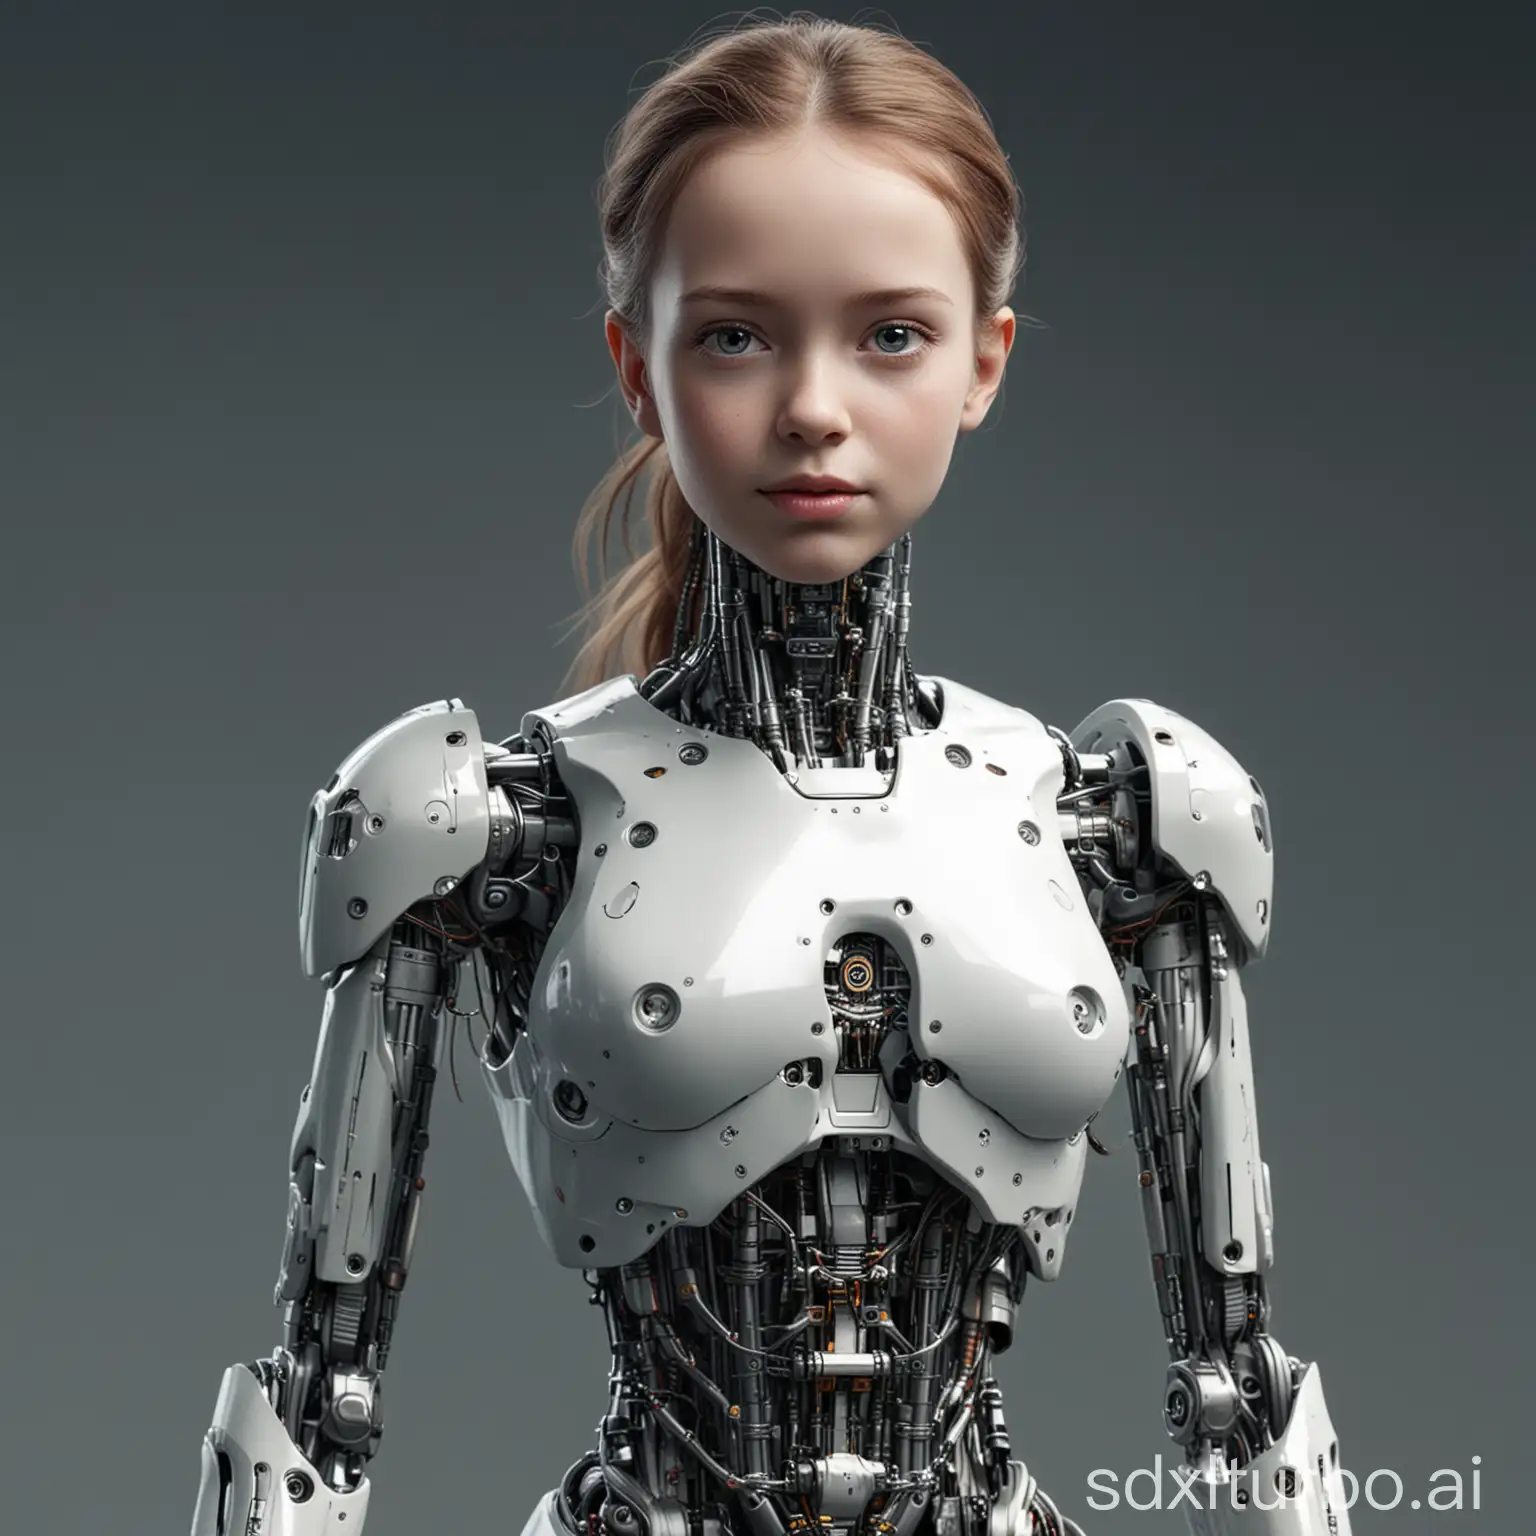 Futuristic-Young-Girl-with-Cybernetic-Implants